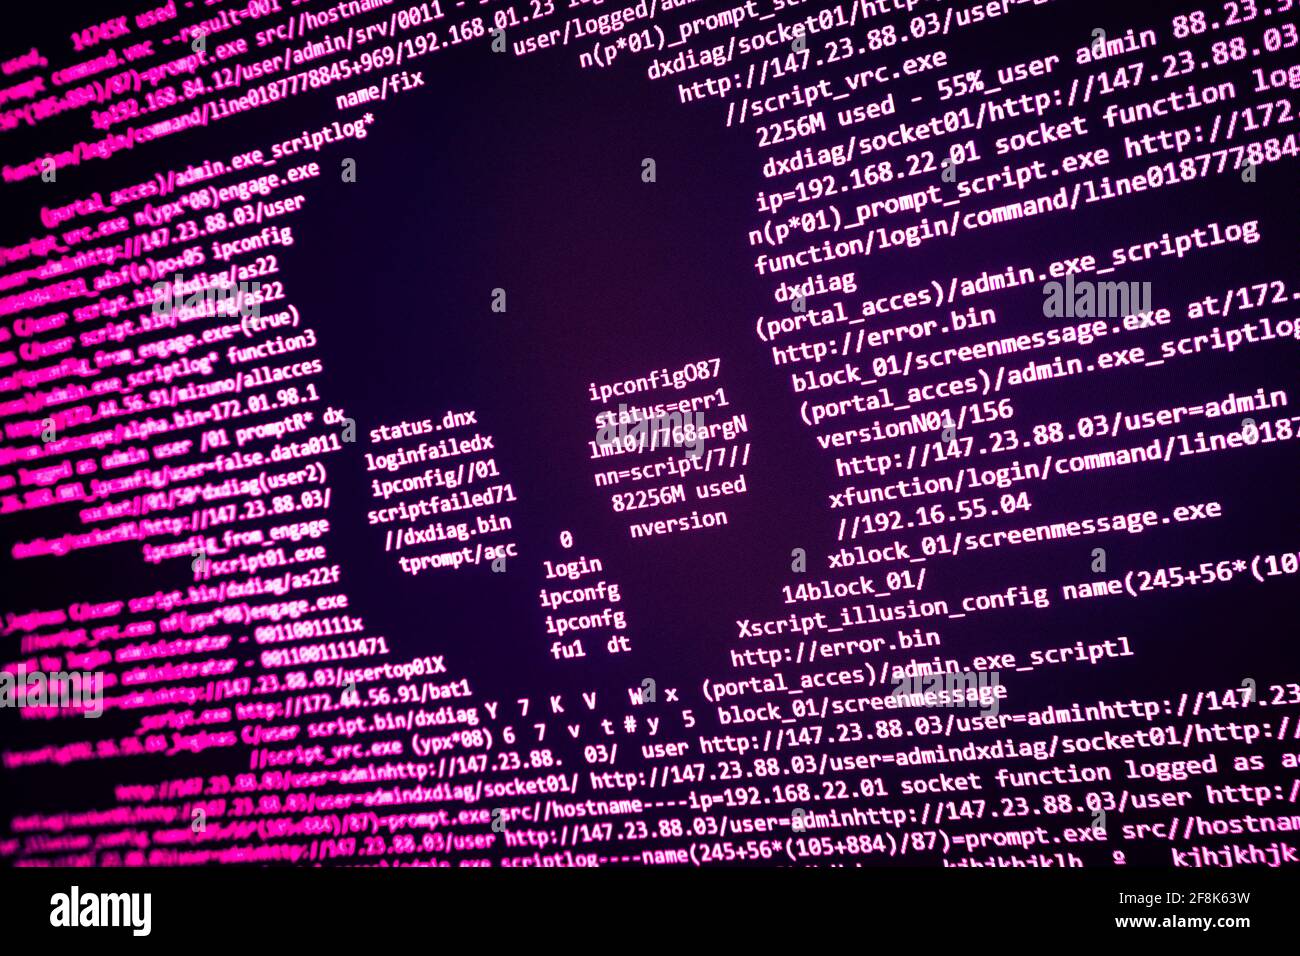 Hacker attack message in computer Stock Photo